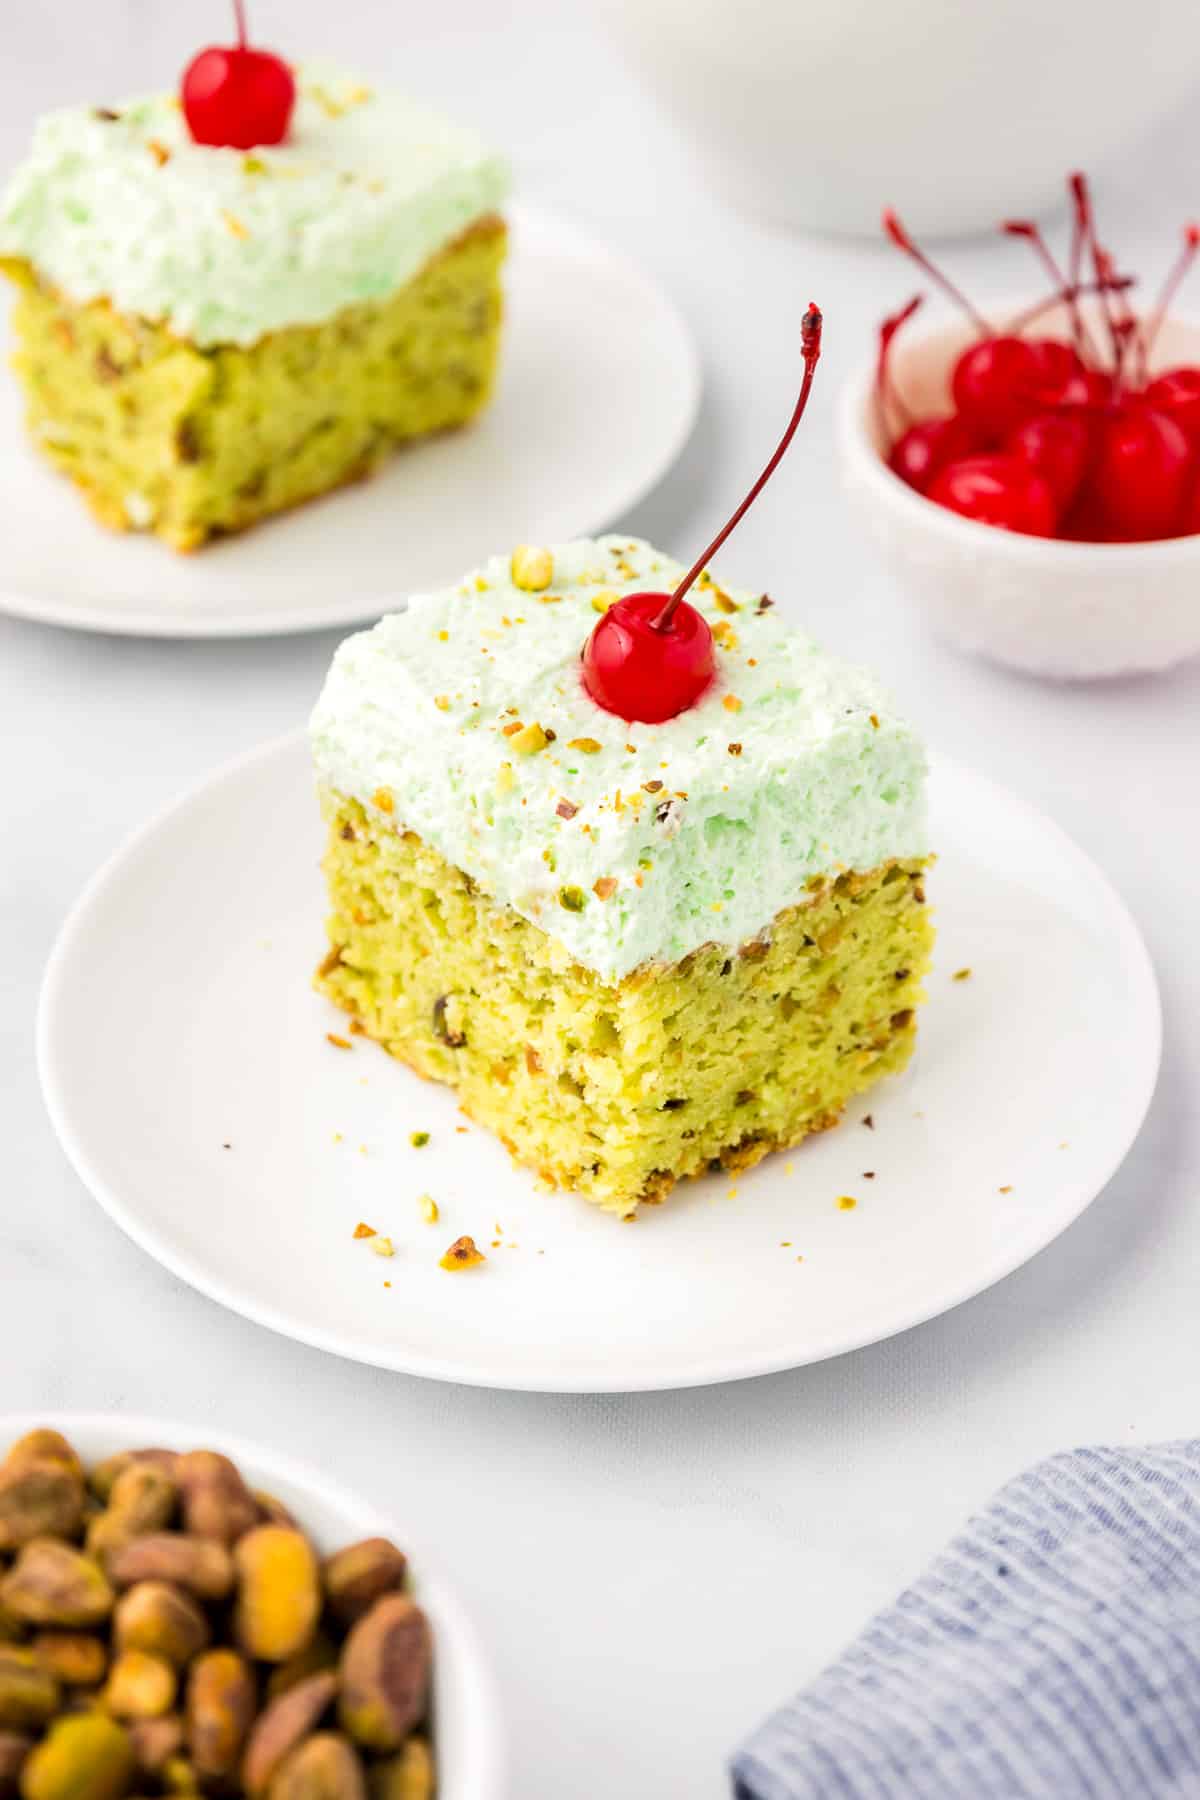 Pistachio pudding cake on a plate with a maraschino cherry and chopped pistachios on top.